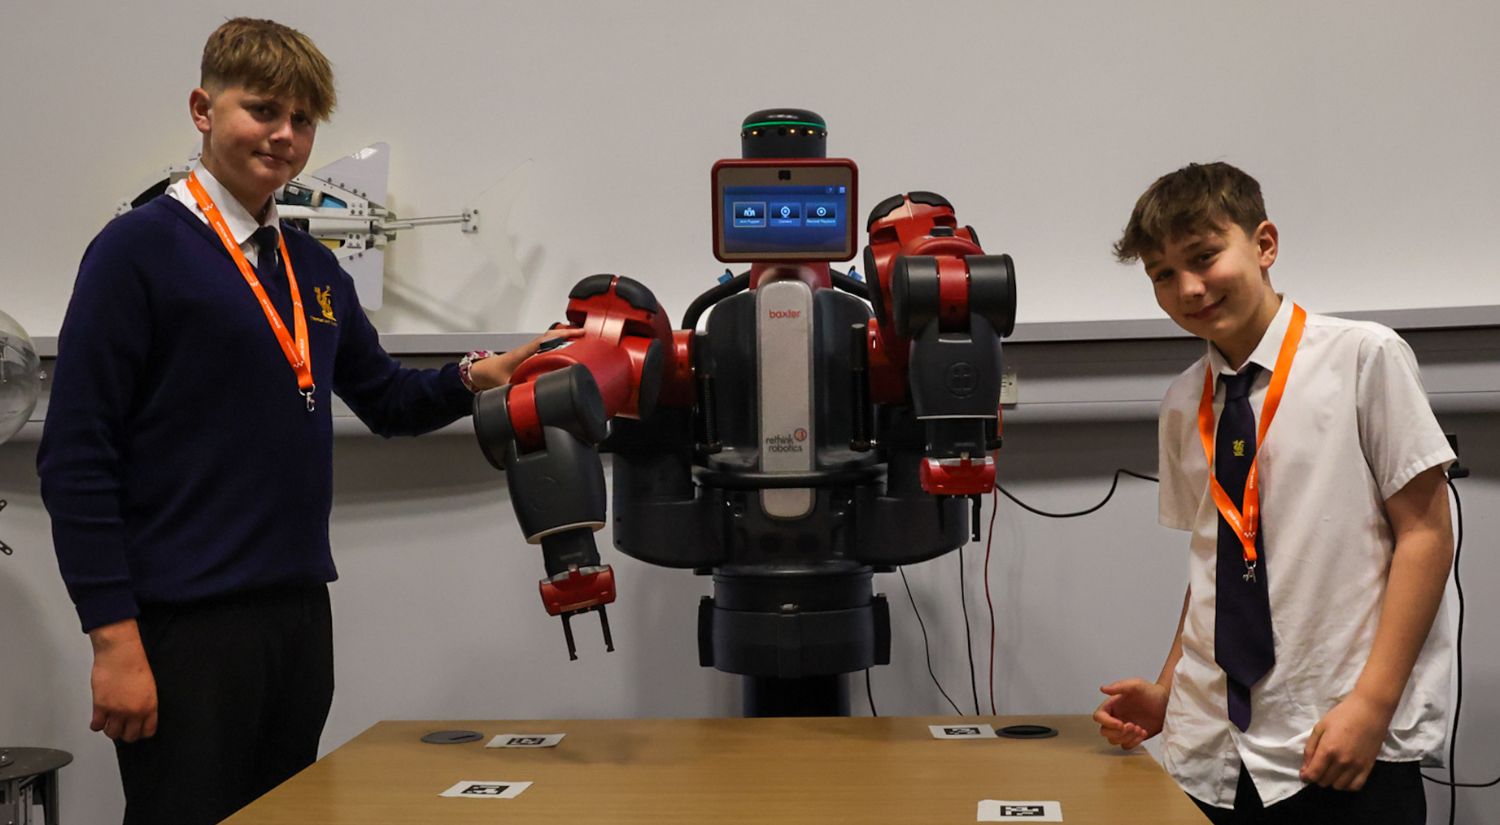 Face-to-face with a robot